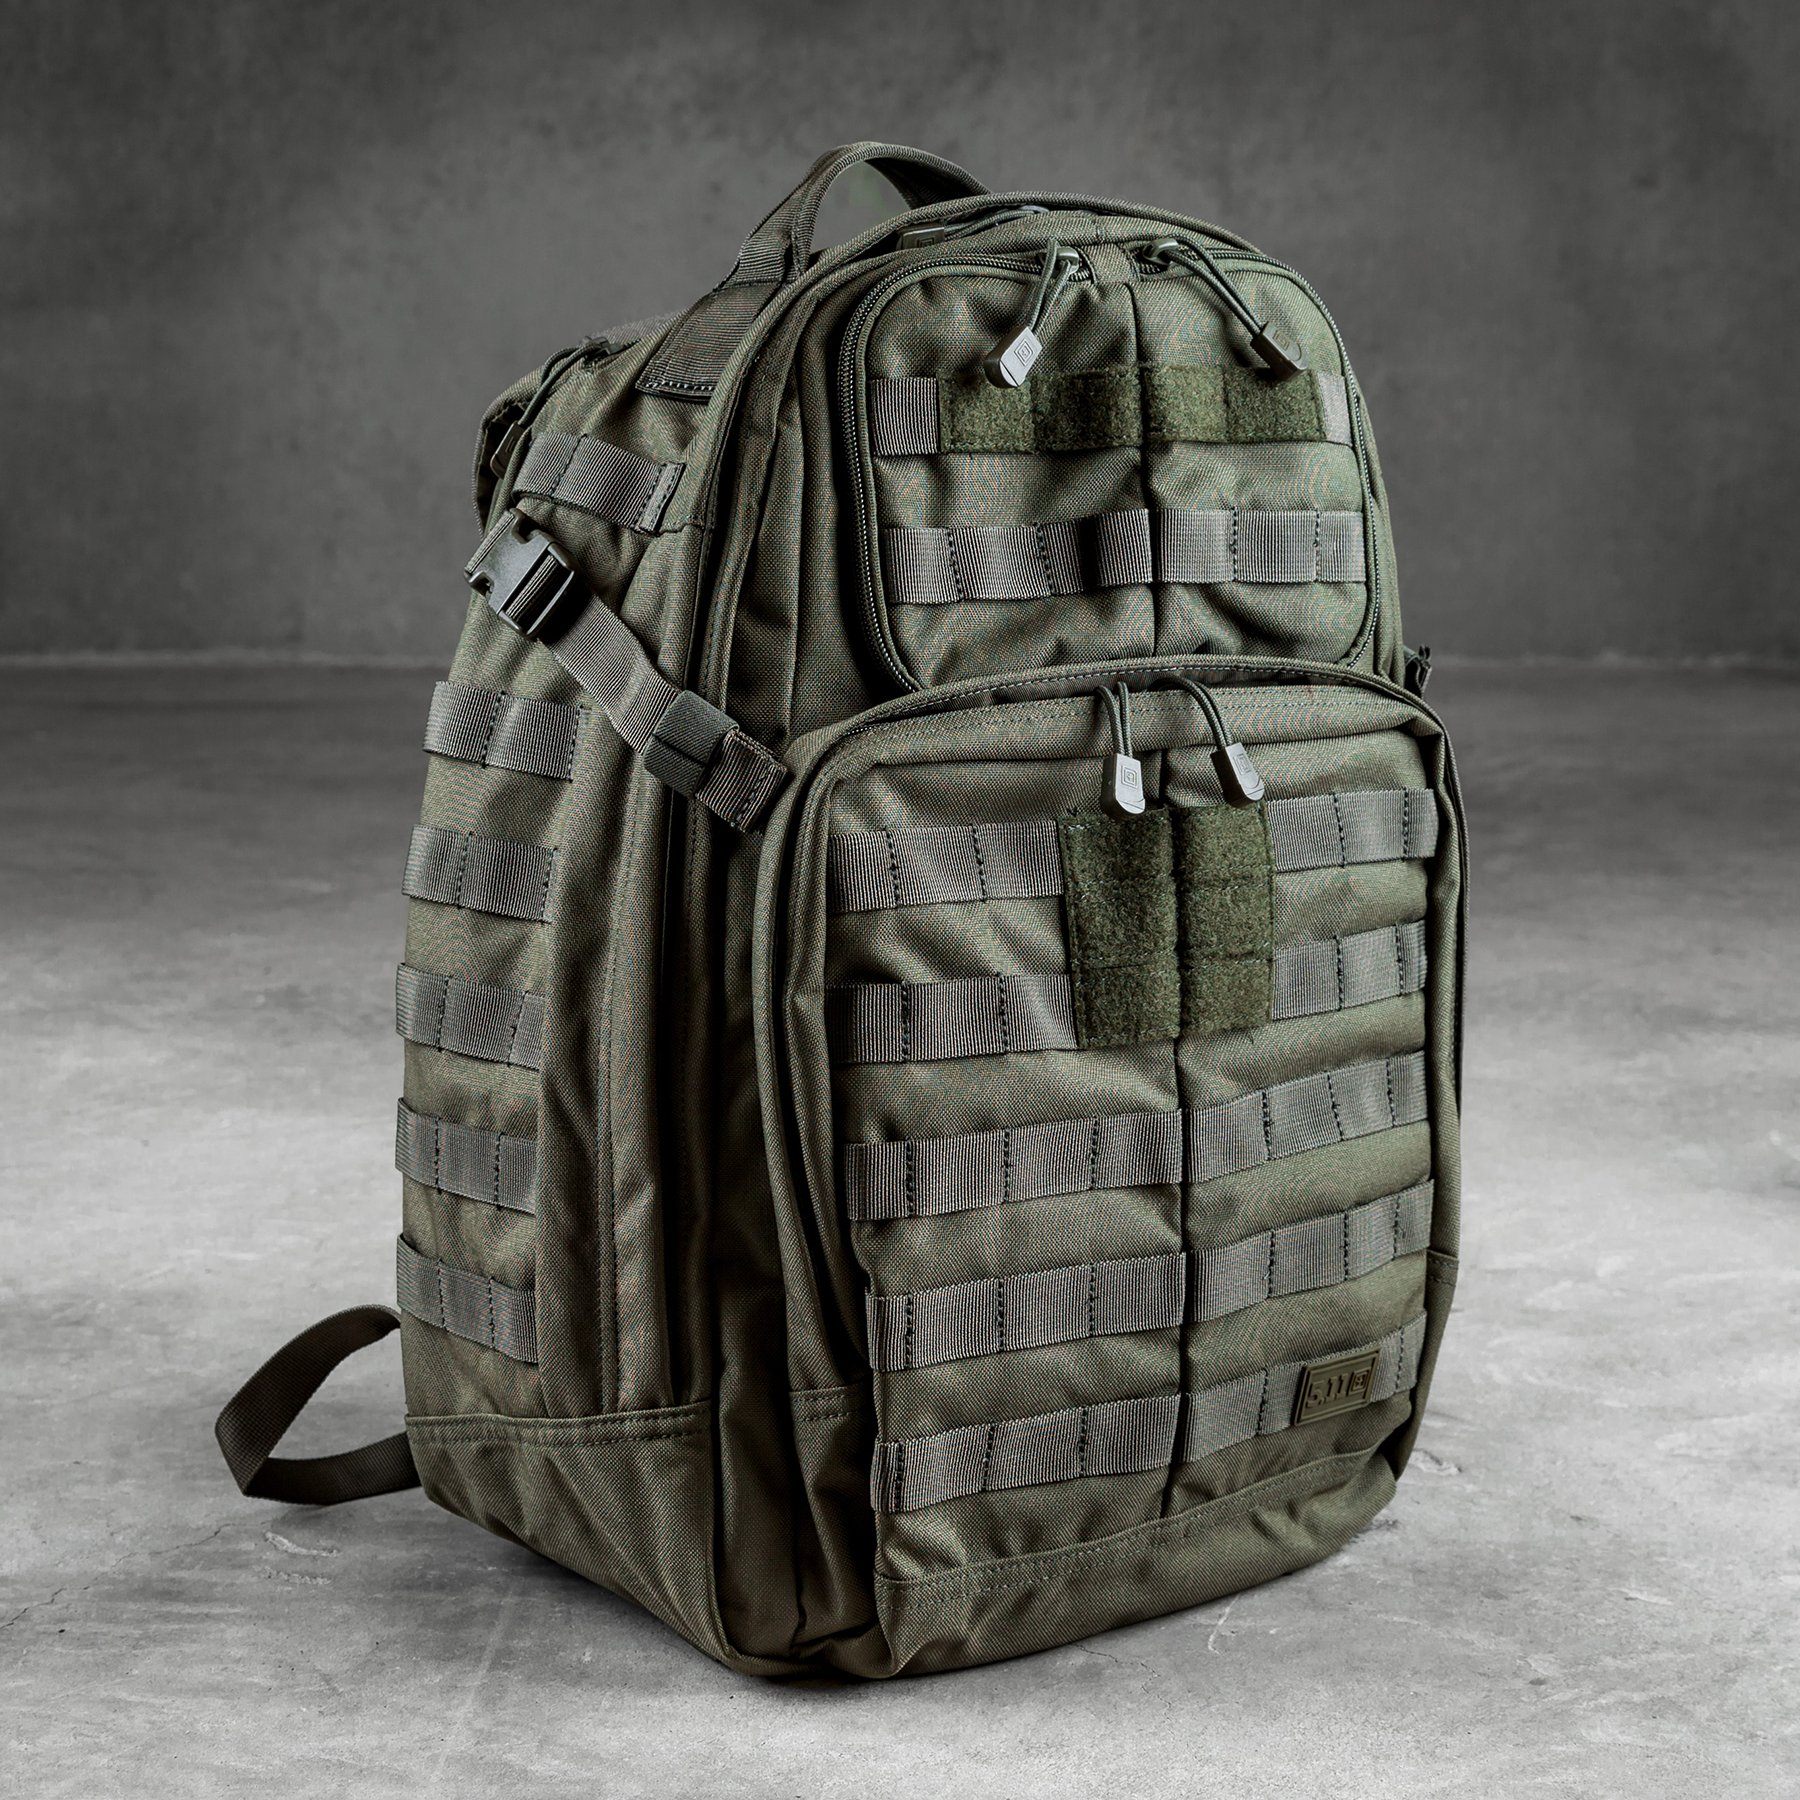 5.11 Tactical – The WOD Life